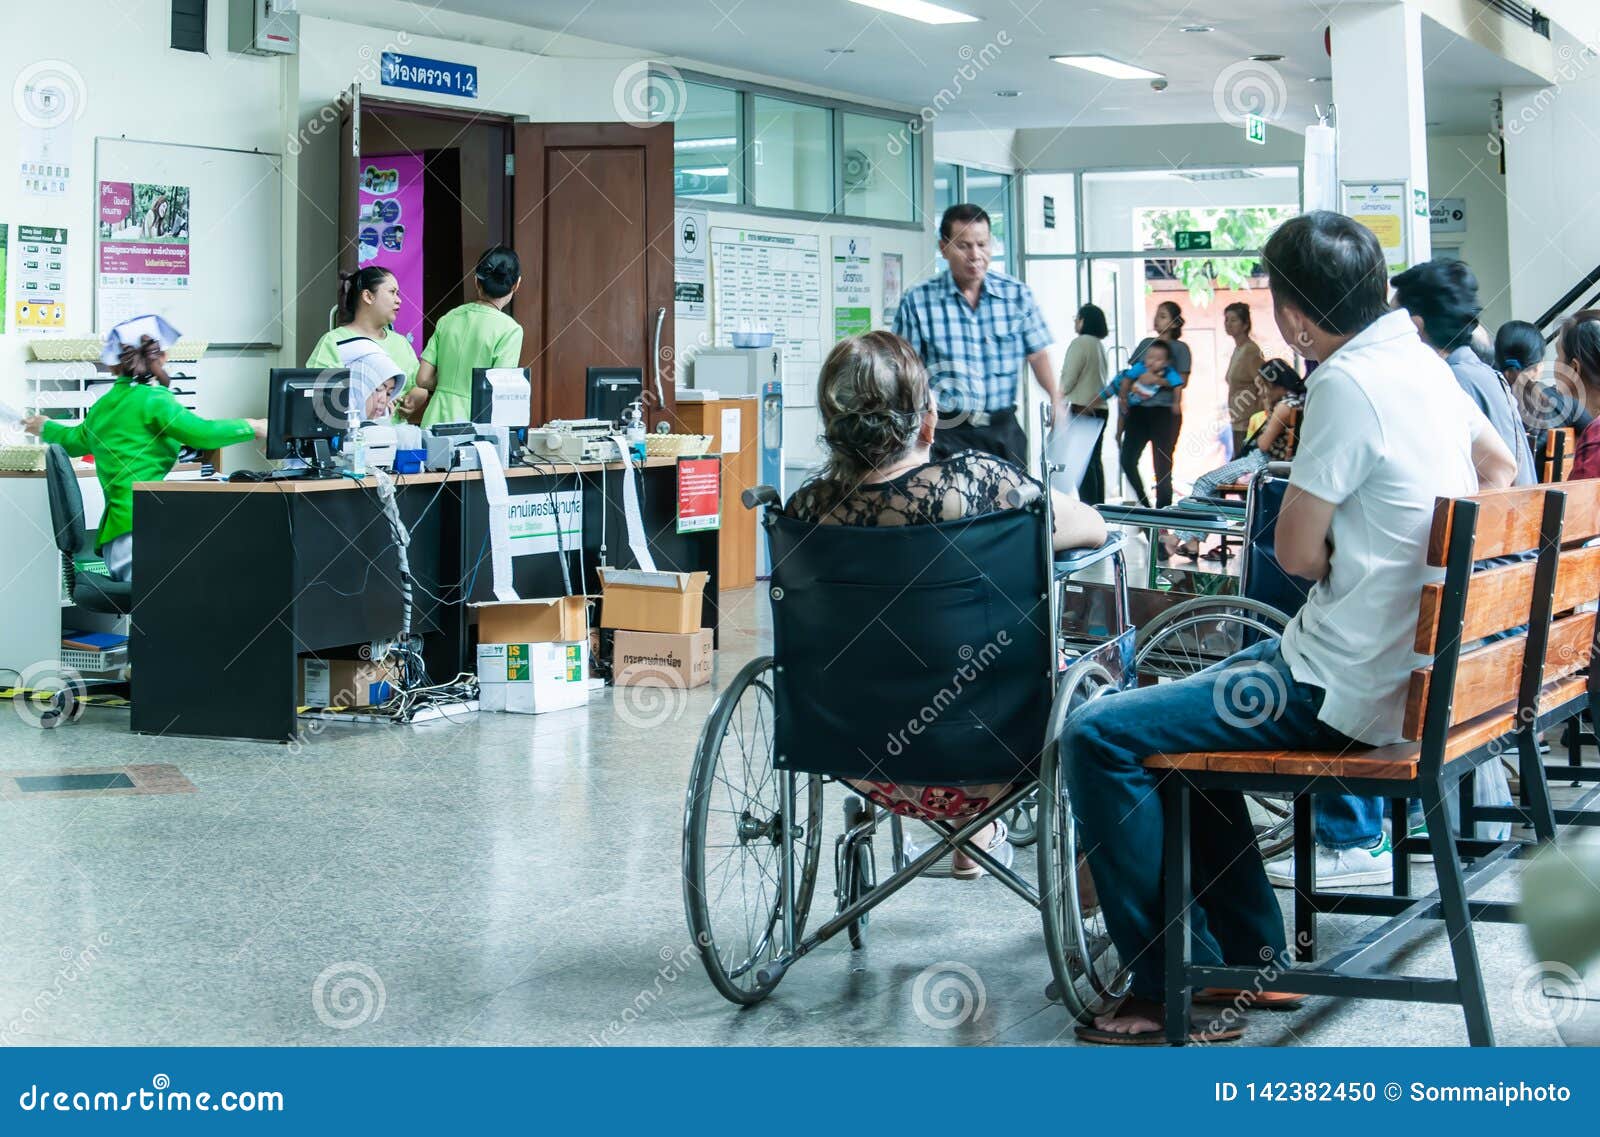 133 Hospital Waiting Room Crowd Stock Photos - Free & Royalty-Free Stock Photos from Dreamstime